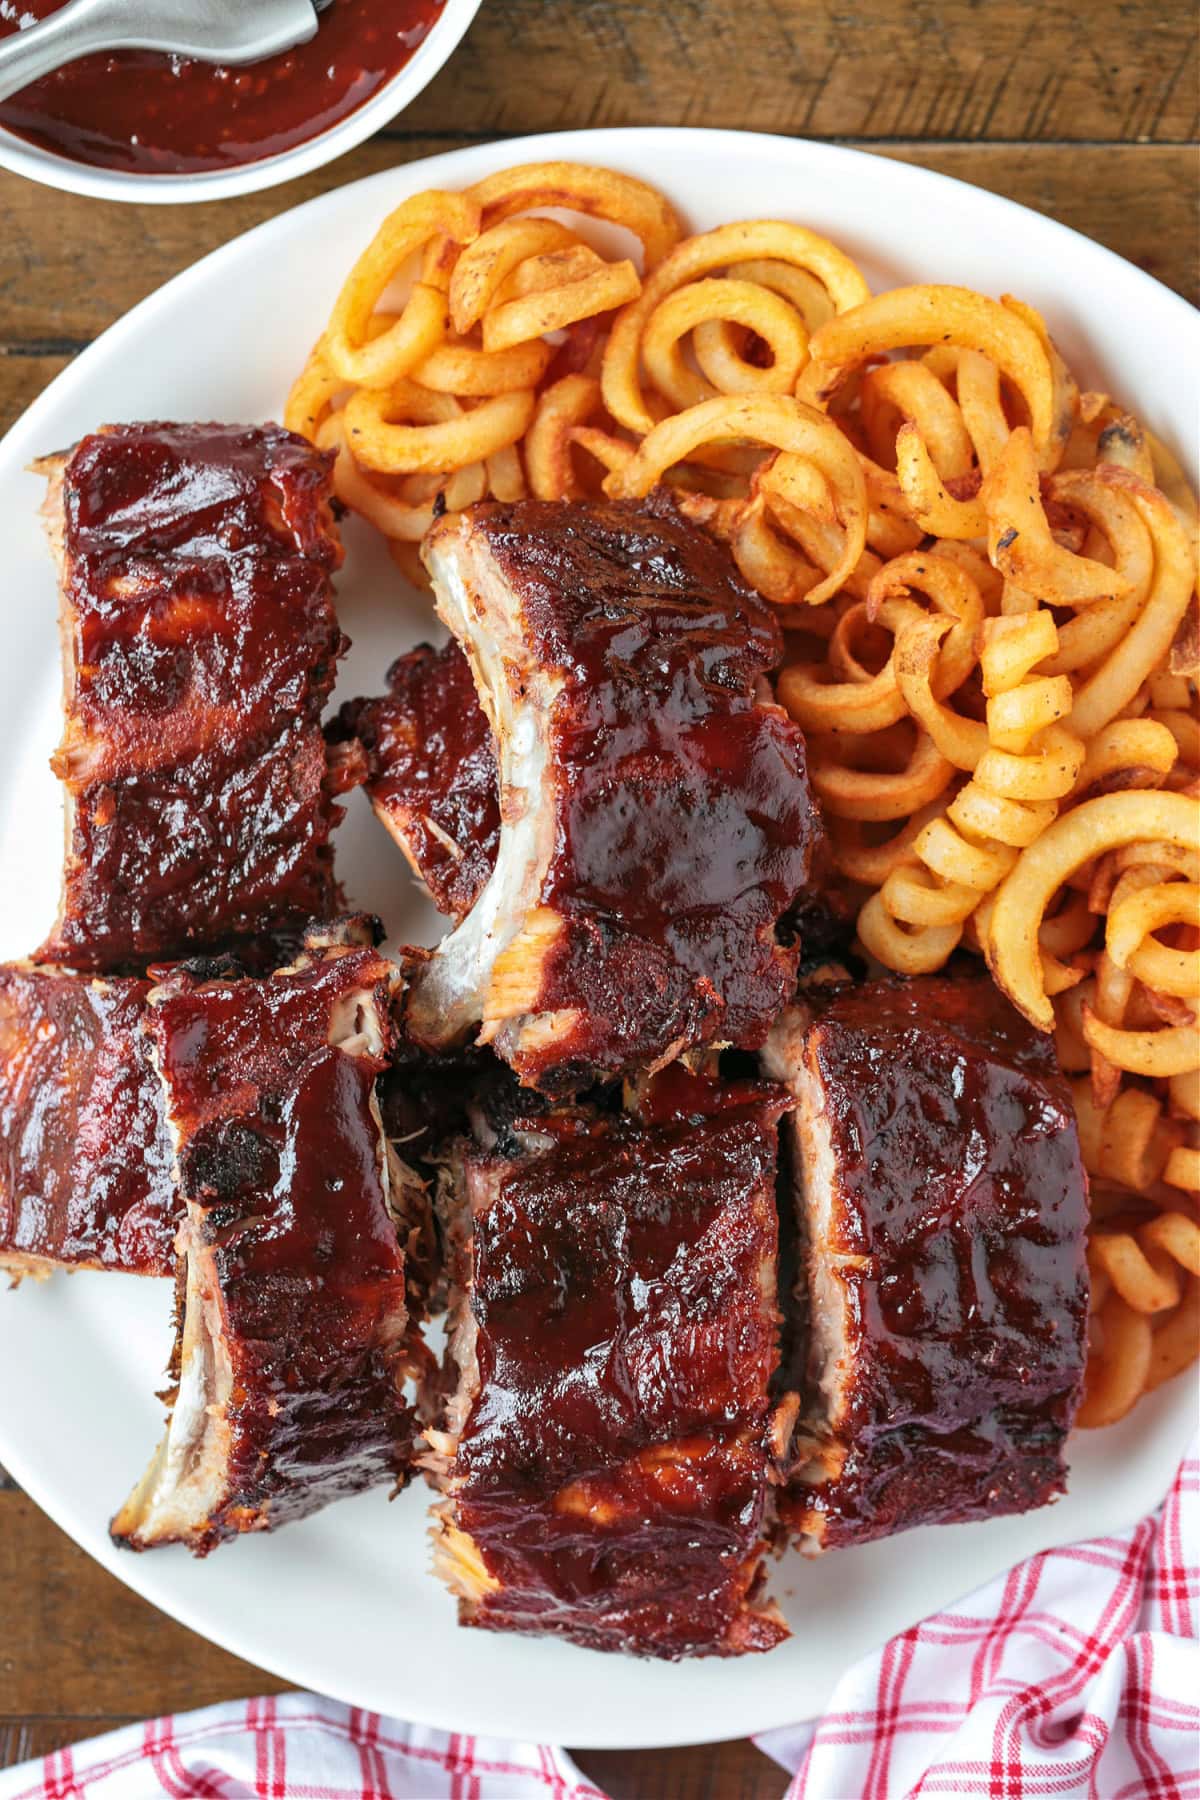 sections of bbq ribs on plate with curly fries